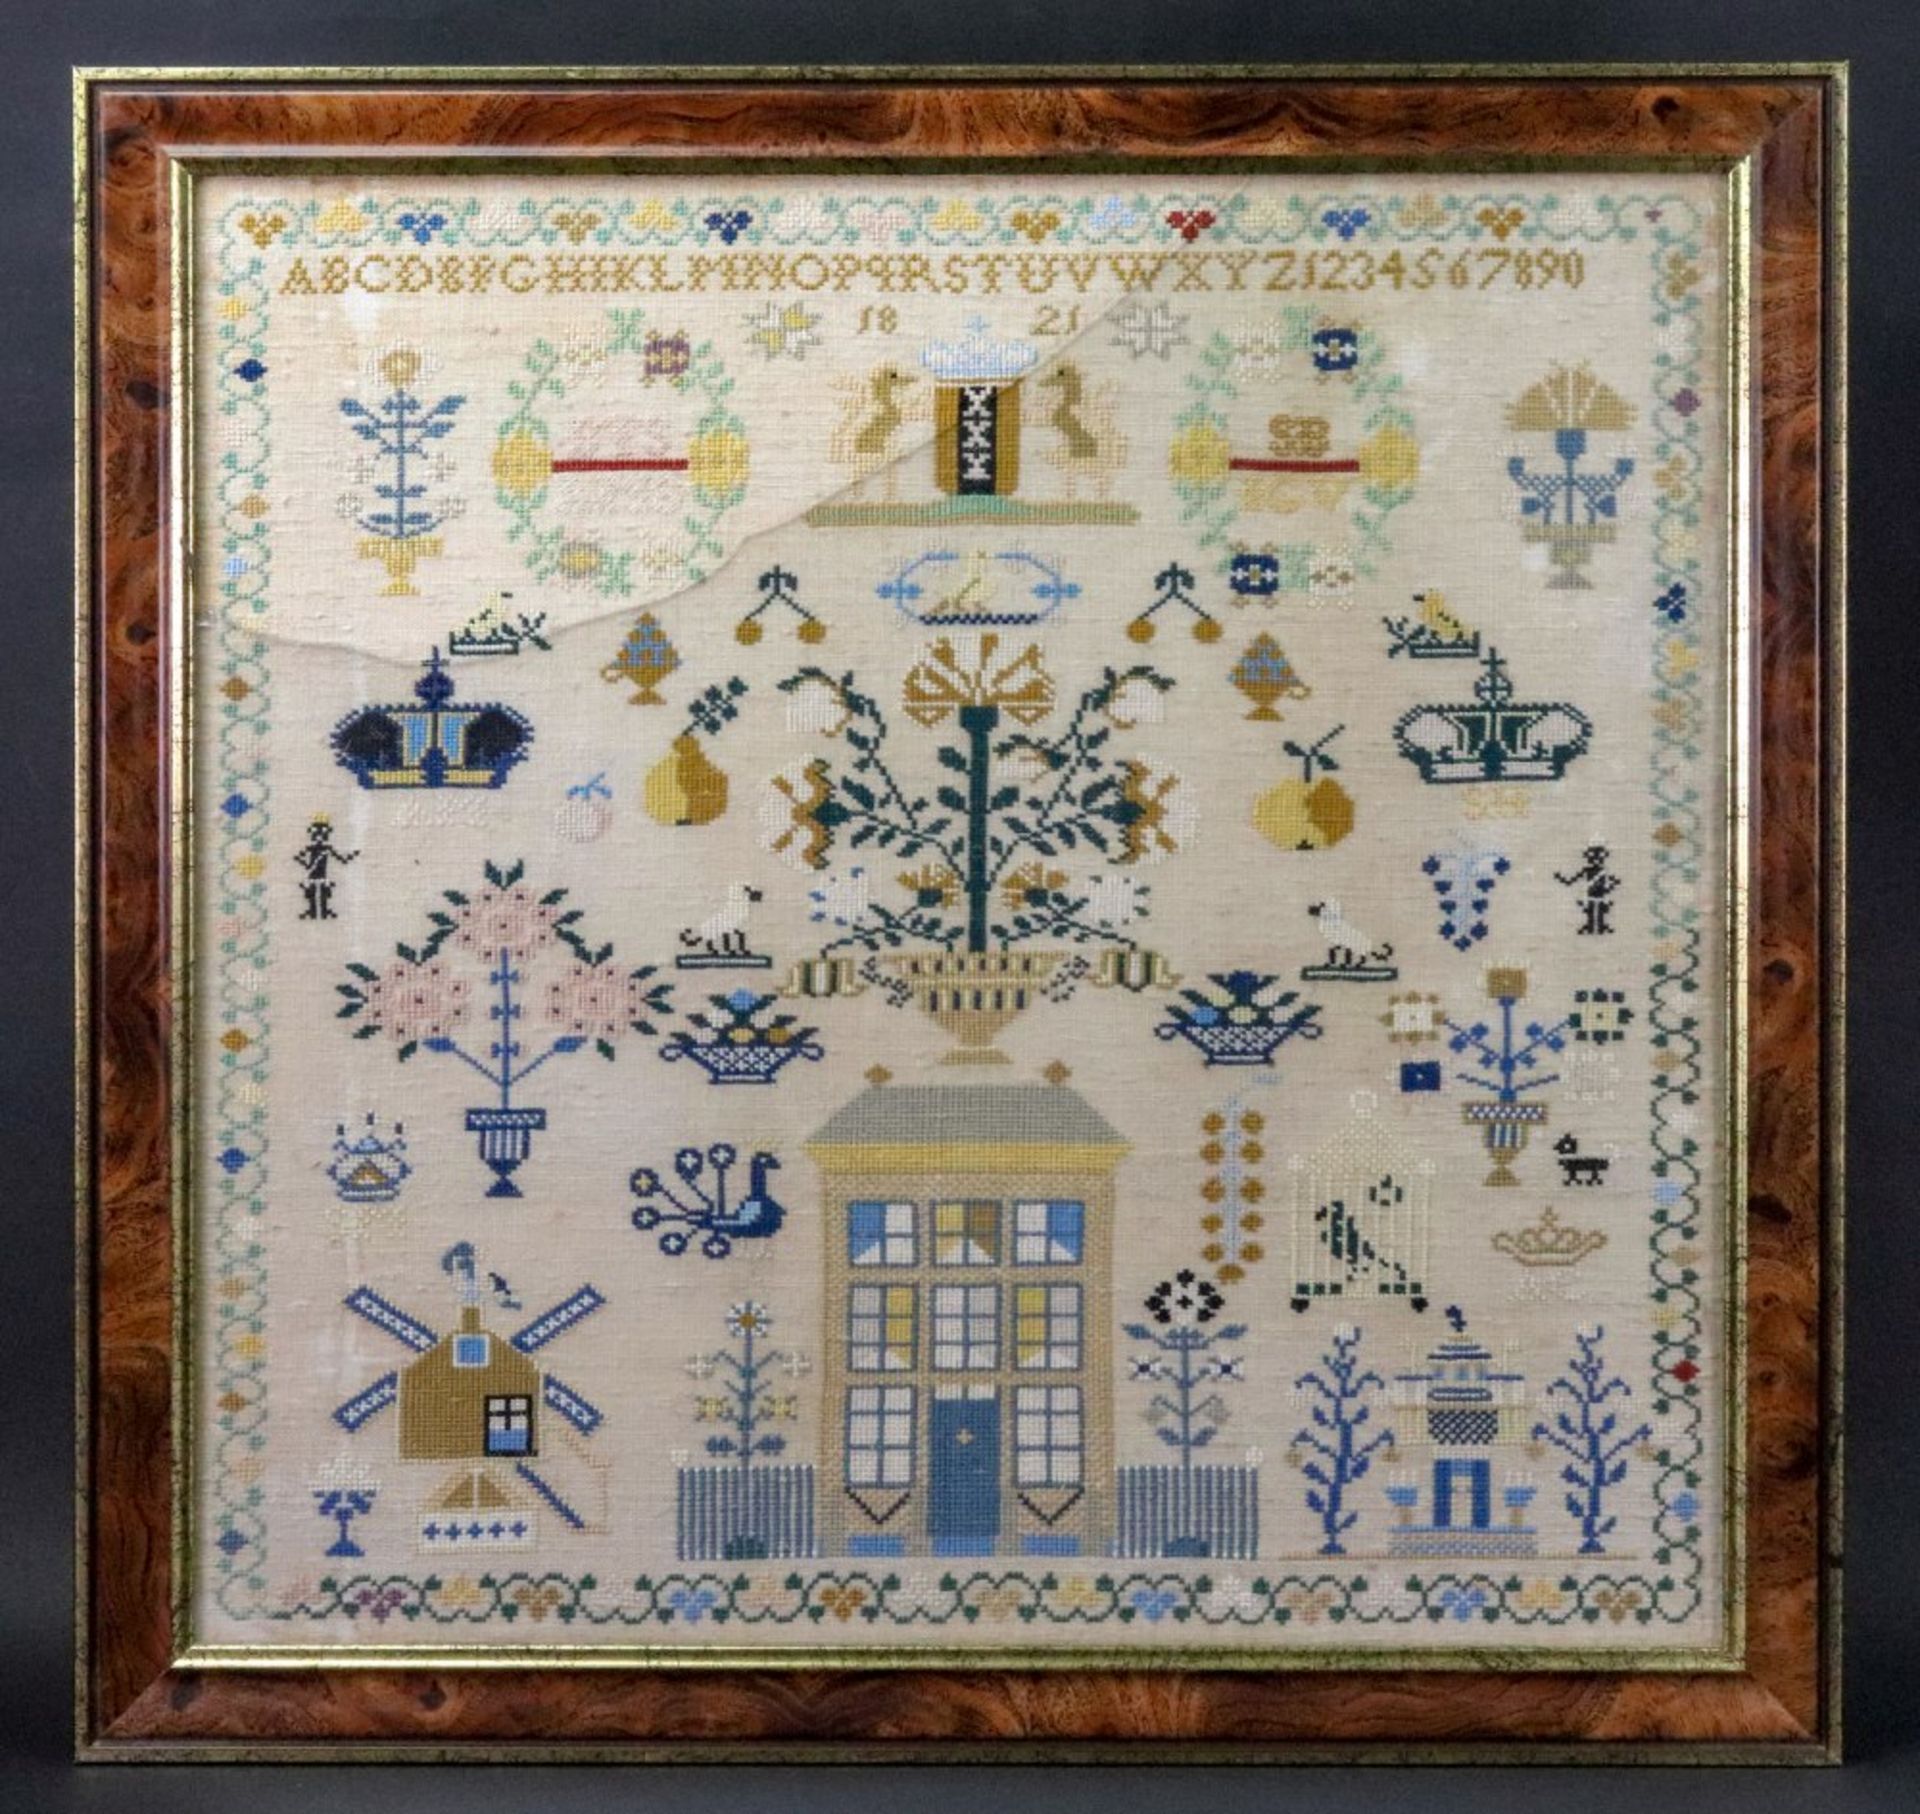 A needlework sampler, dated 1821, with a central house flanked by a windmill and another building,